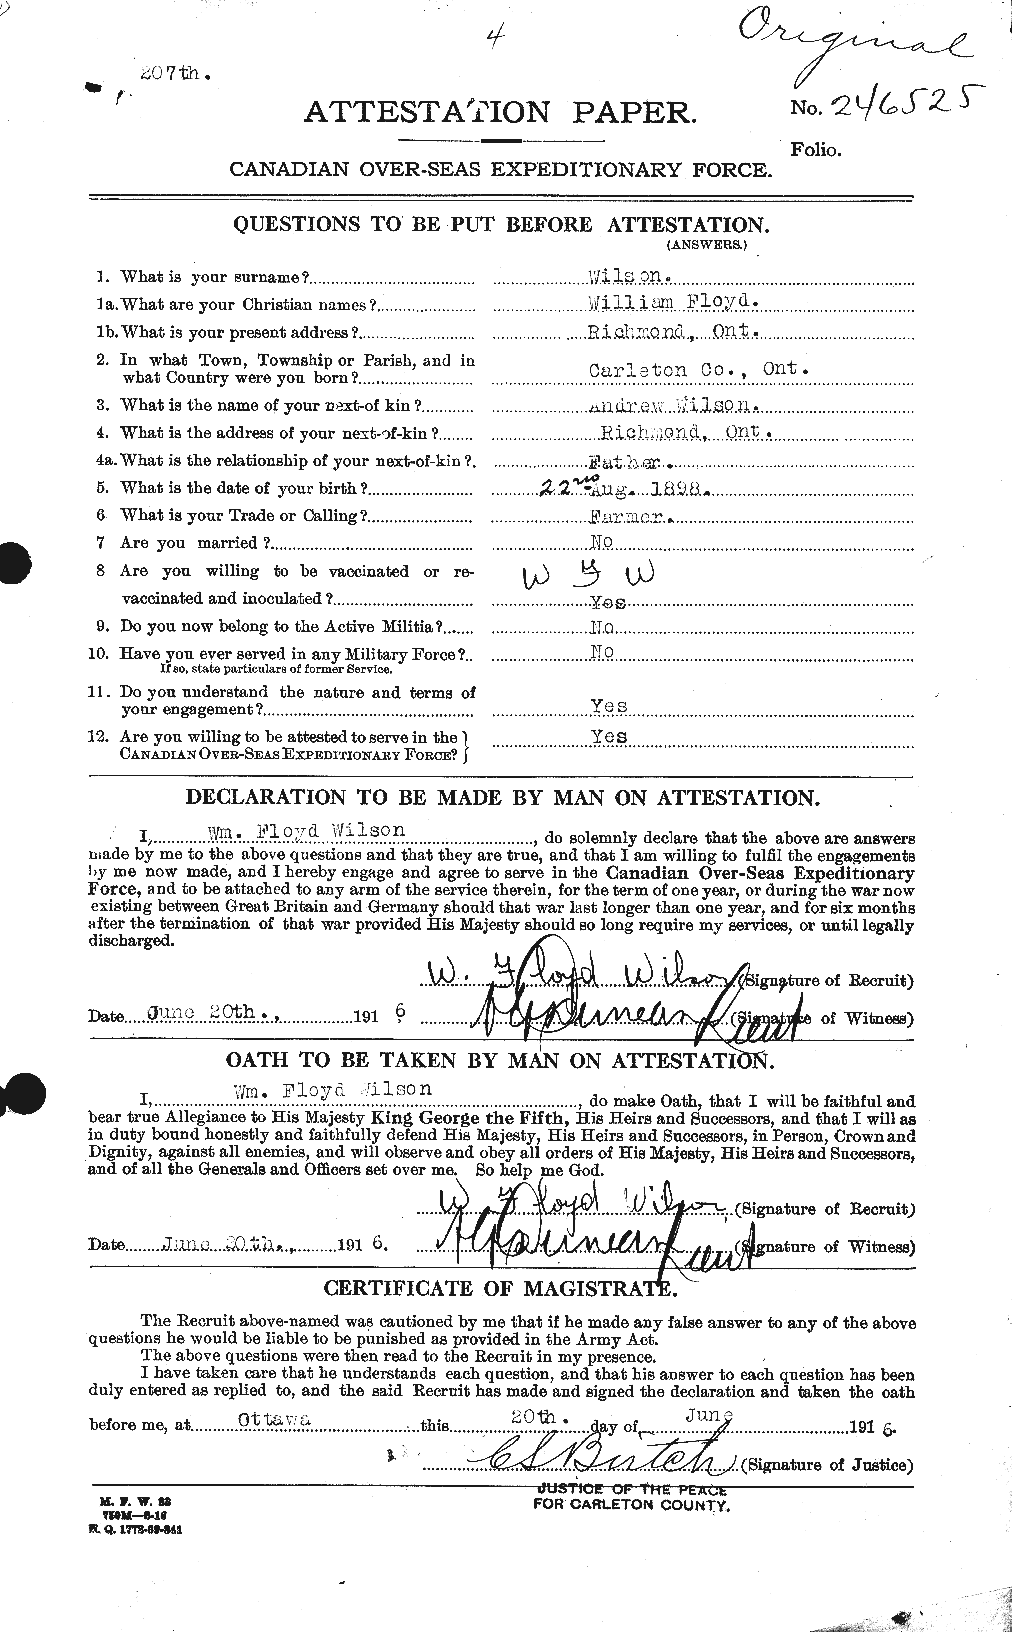 Personnel Records of the First World War - CEF 681988a